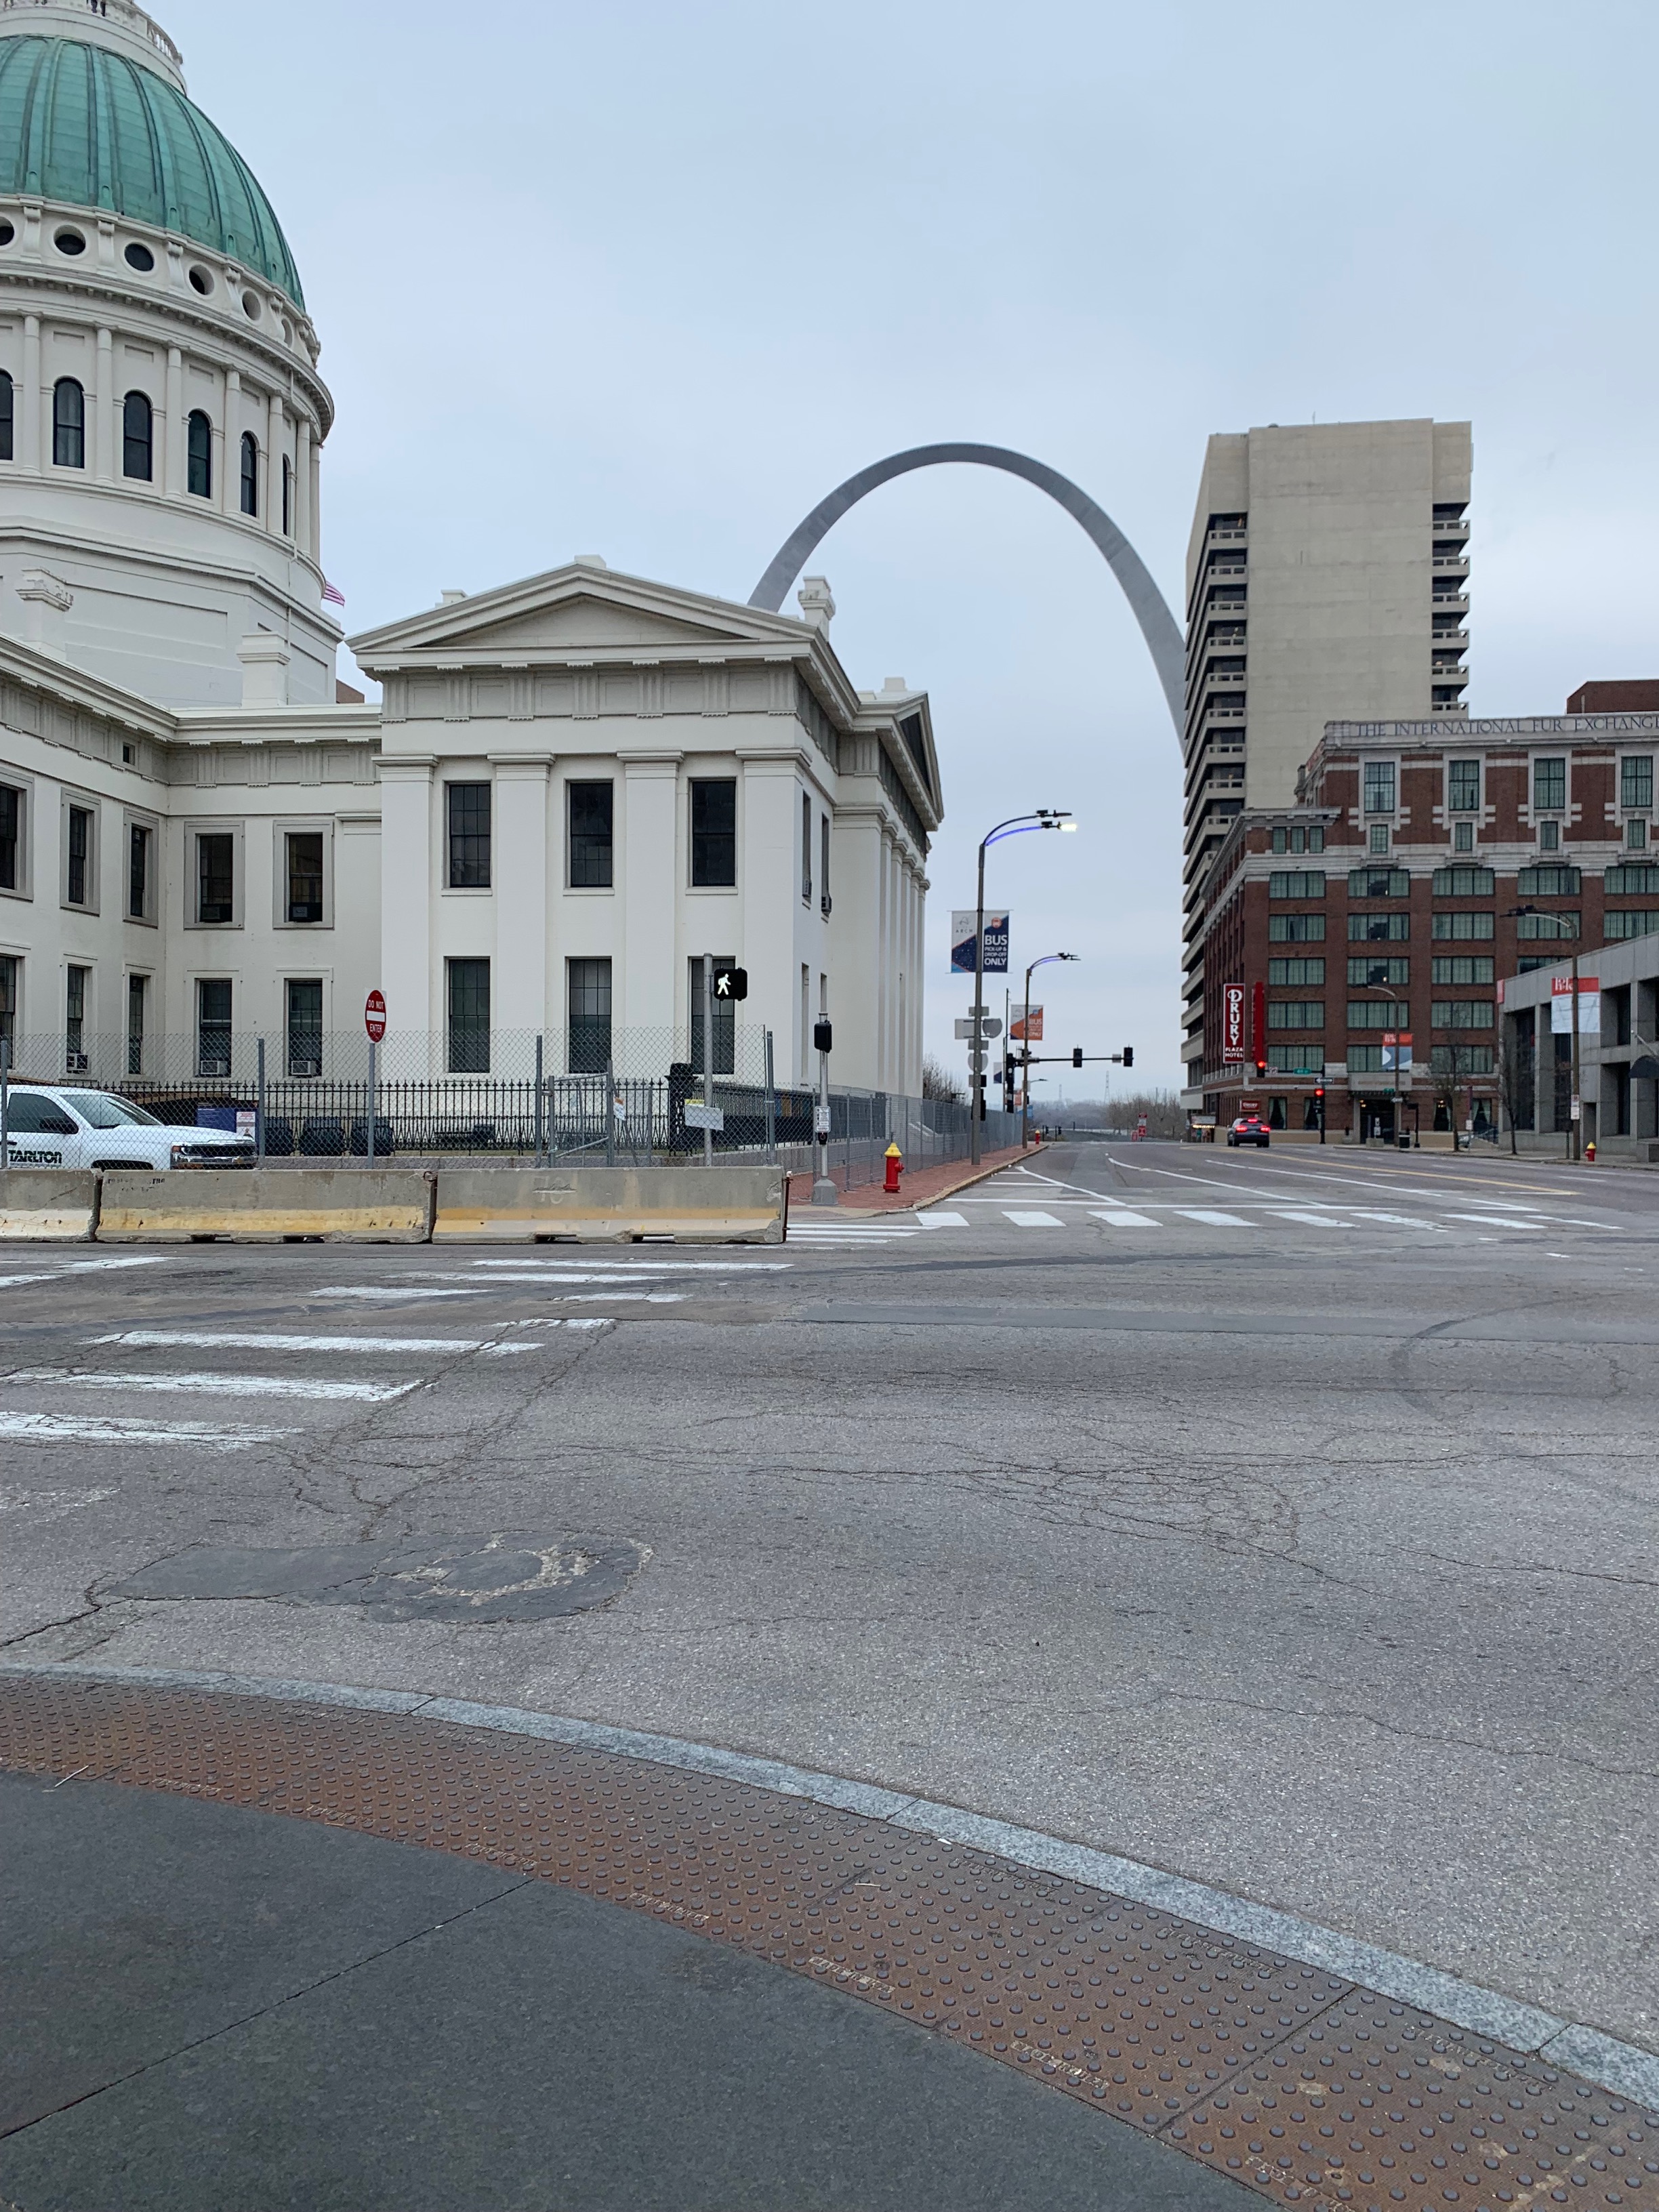 Courthouse, apartments, and Arch on street in St. Louis